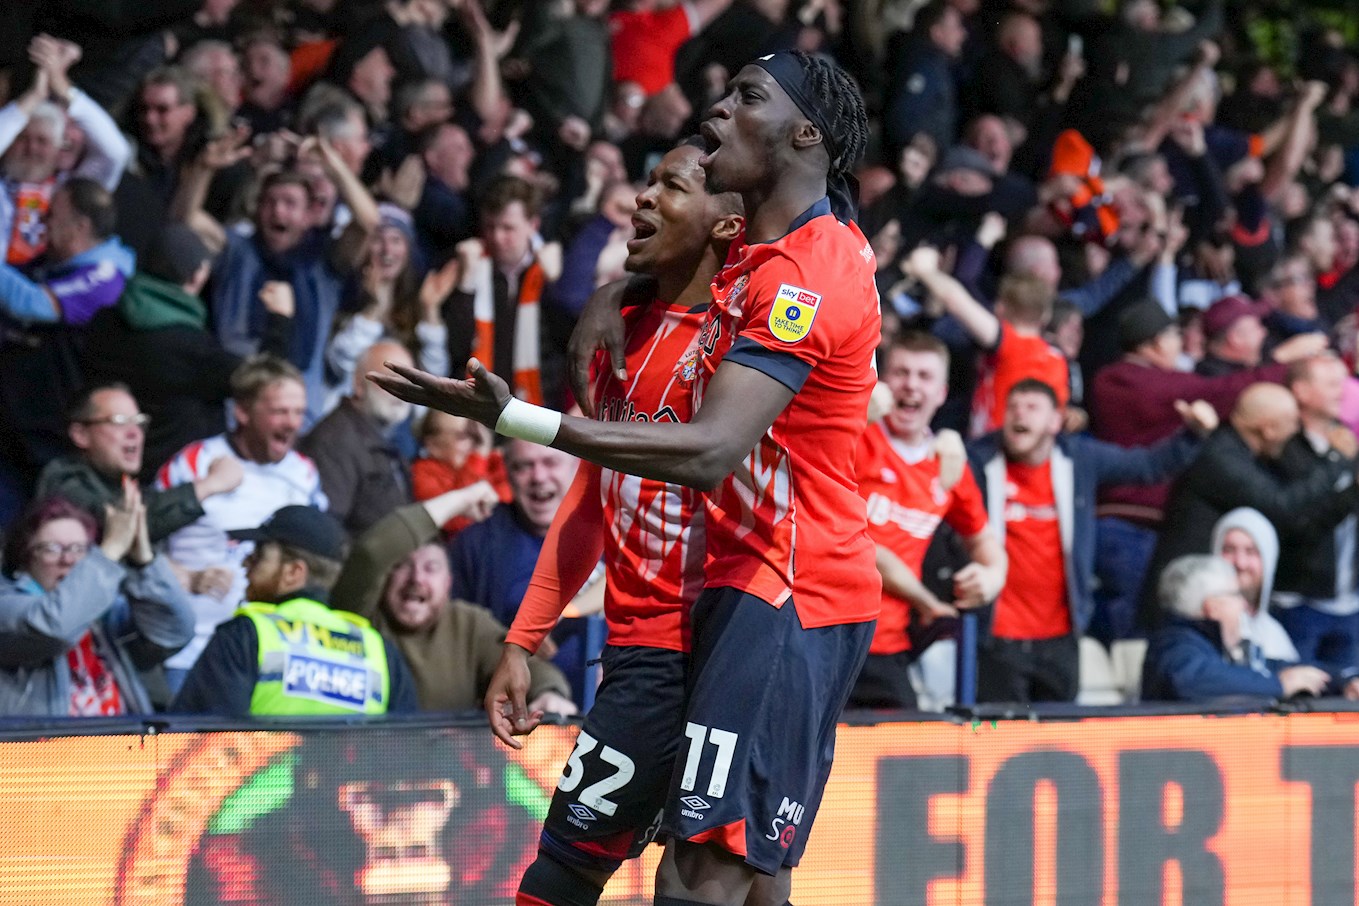 Gabe Osho celebrating his goal in the Championship play-off semi-final second leg against Sunderland at Kenilworth Road with Elijah Adebayo.